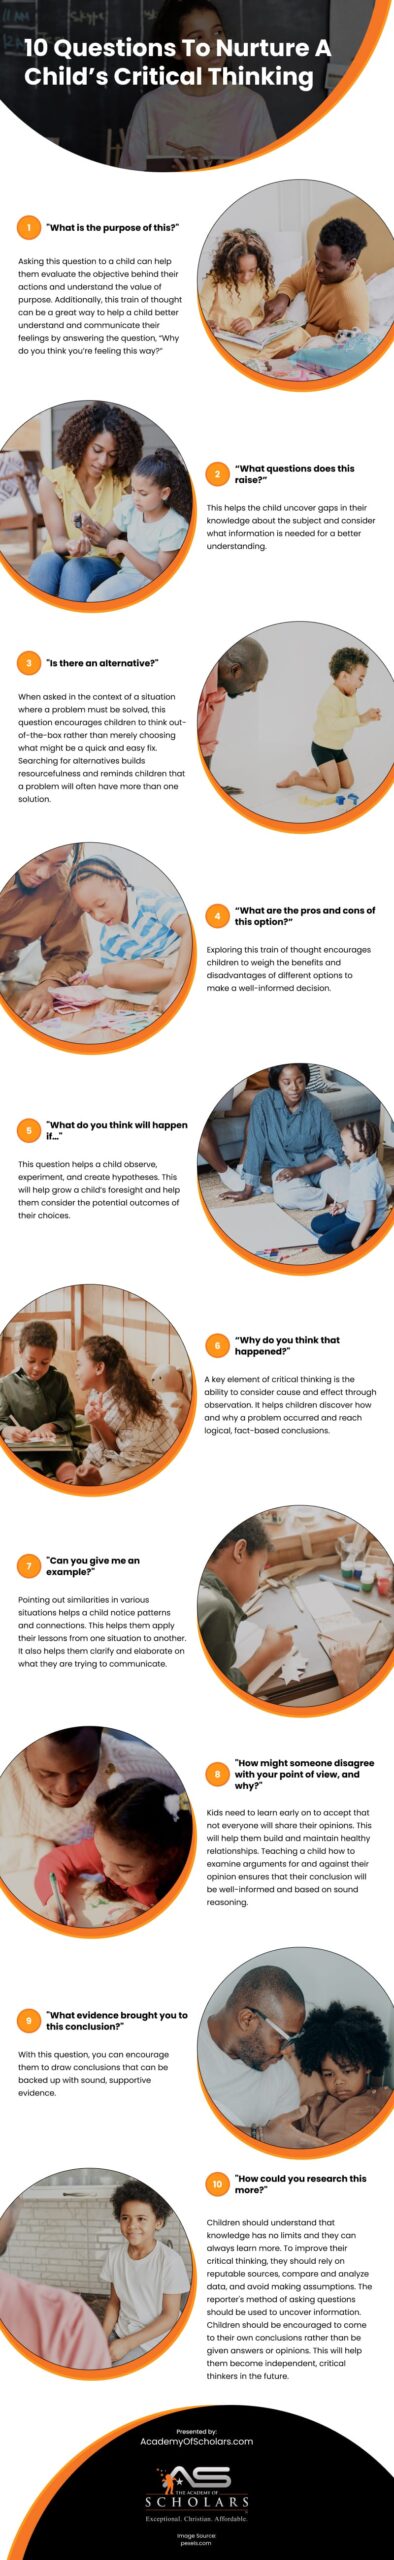 10 Questions To Nurture A Child’s Critical Thinking Infographic